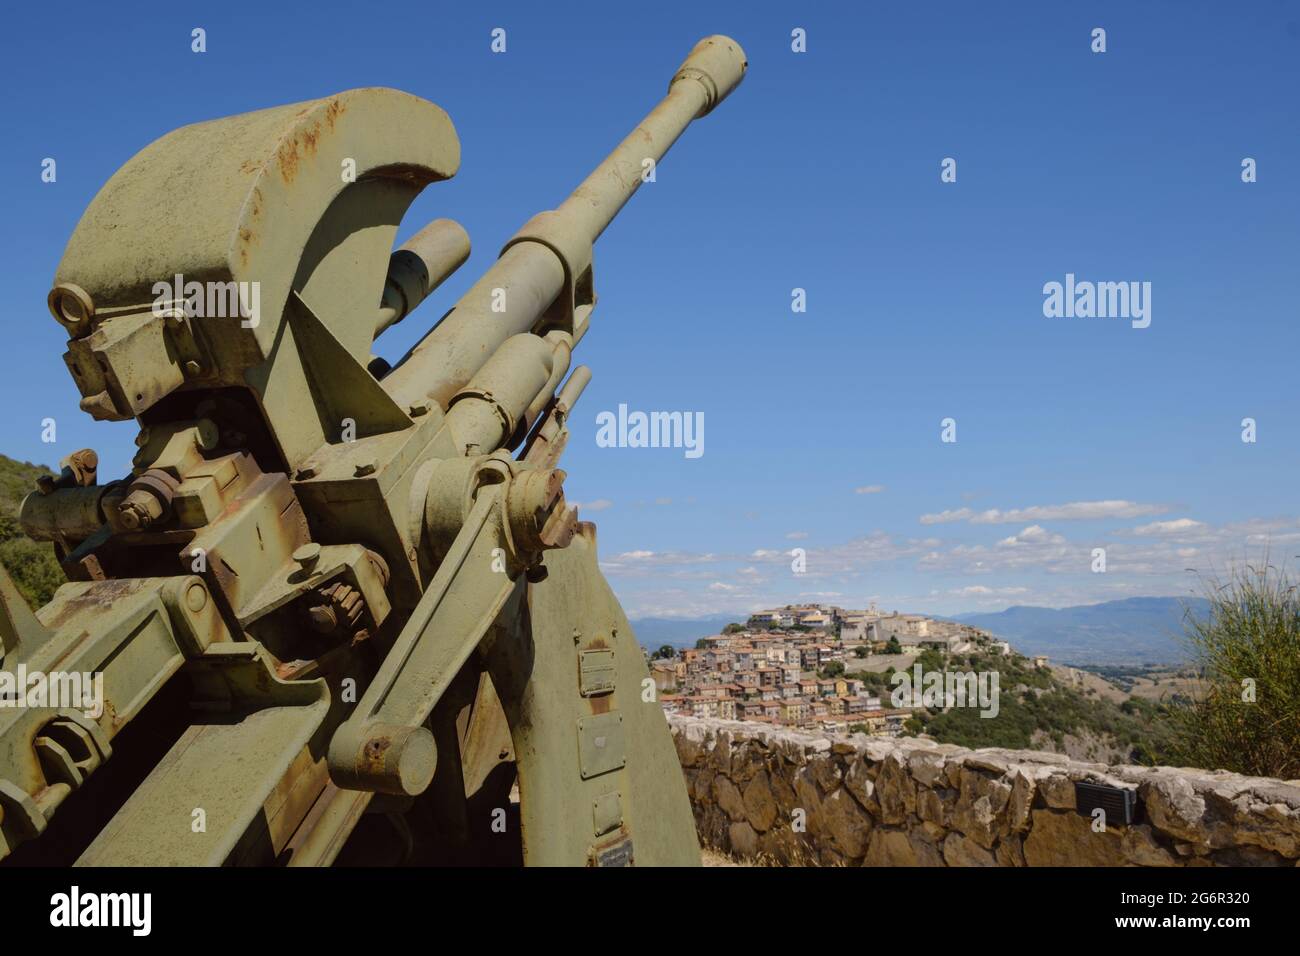 Ancient Sant' Oreste hamlet on the background with a ww2 anti aircraft cannon in foreground near Monte Soratte shelter, Sant'Oreste, Rome, Italy Stock Photo